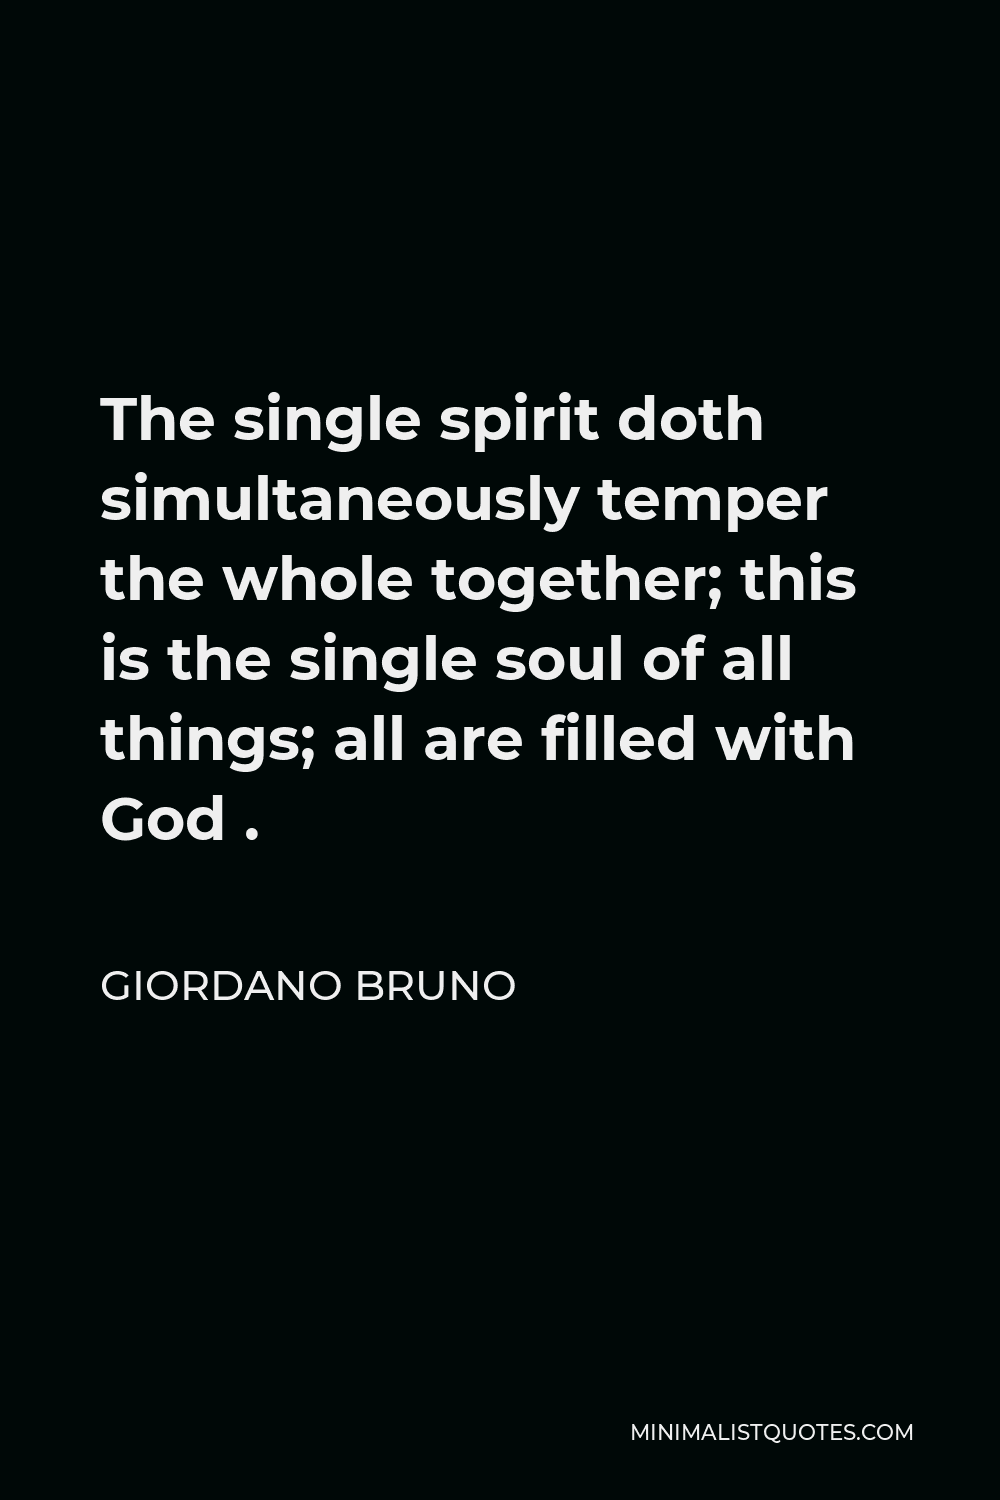 Giordano Bruno Quote - The single spirit doth simultaneously temper the whole together; this is the single soul of all things; all are filled with God .